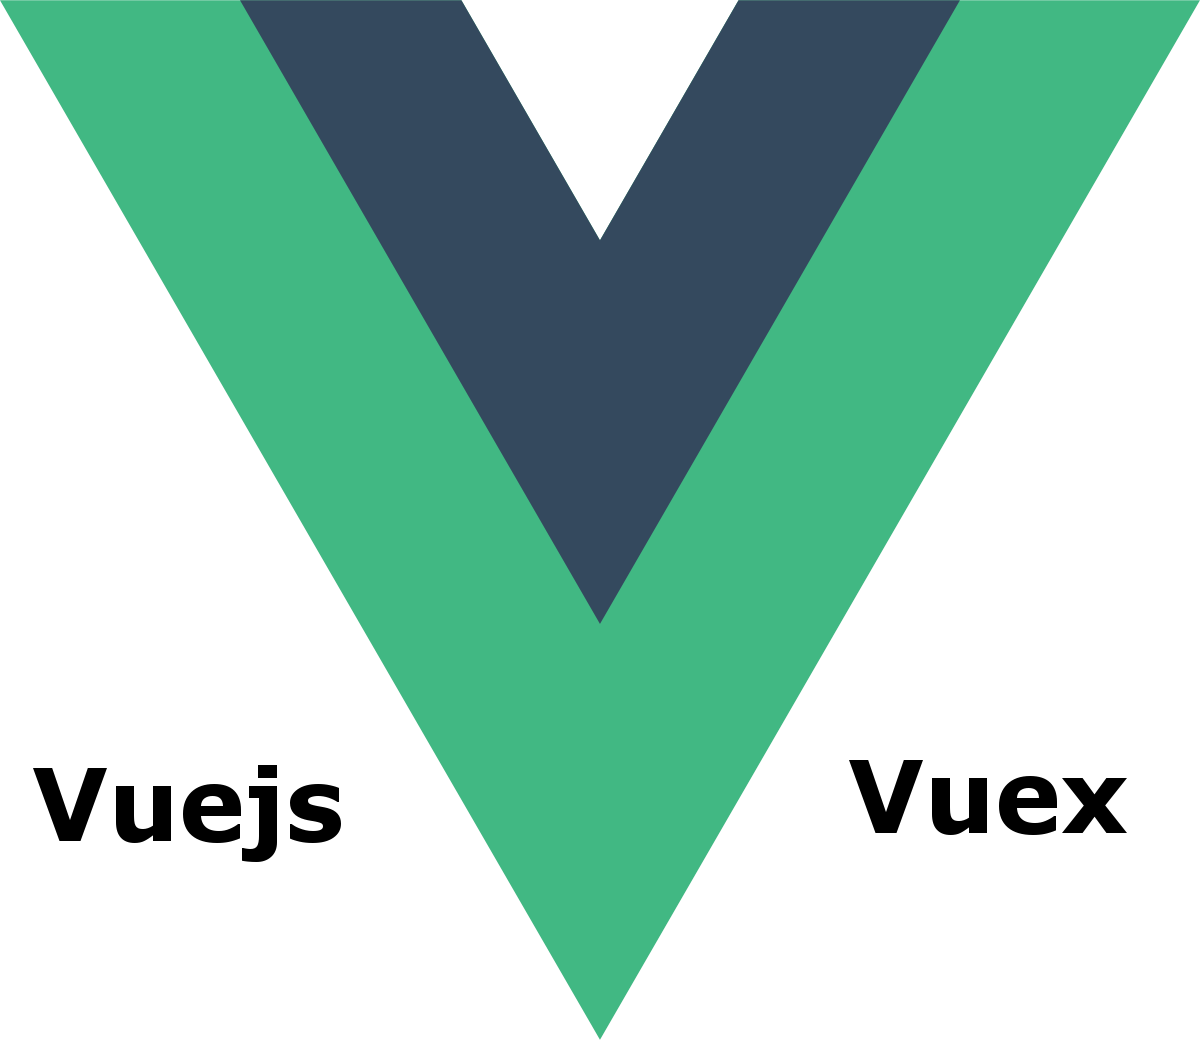 How to paginate data with VueJs and Vuex?